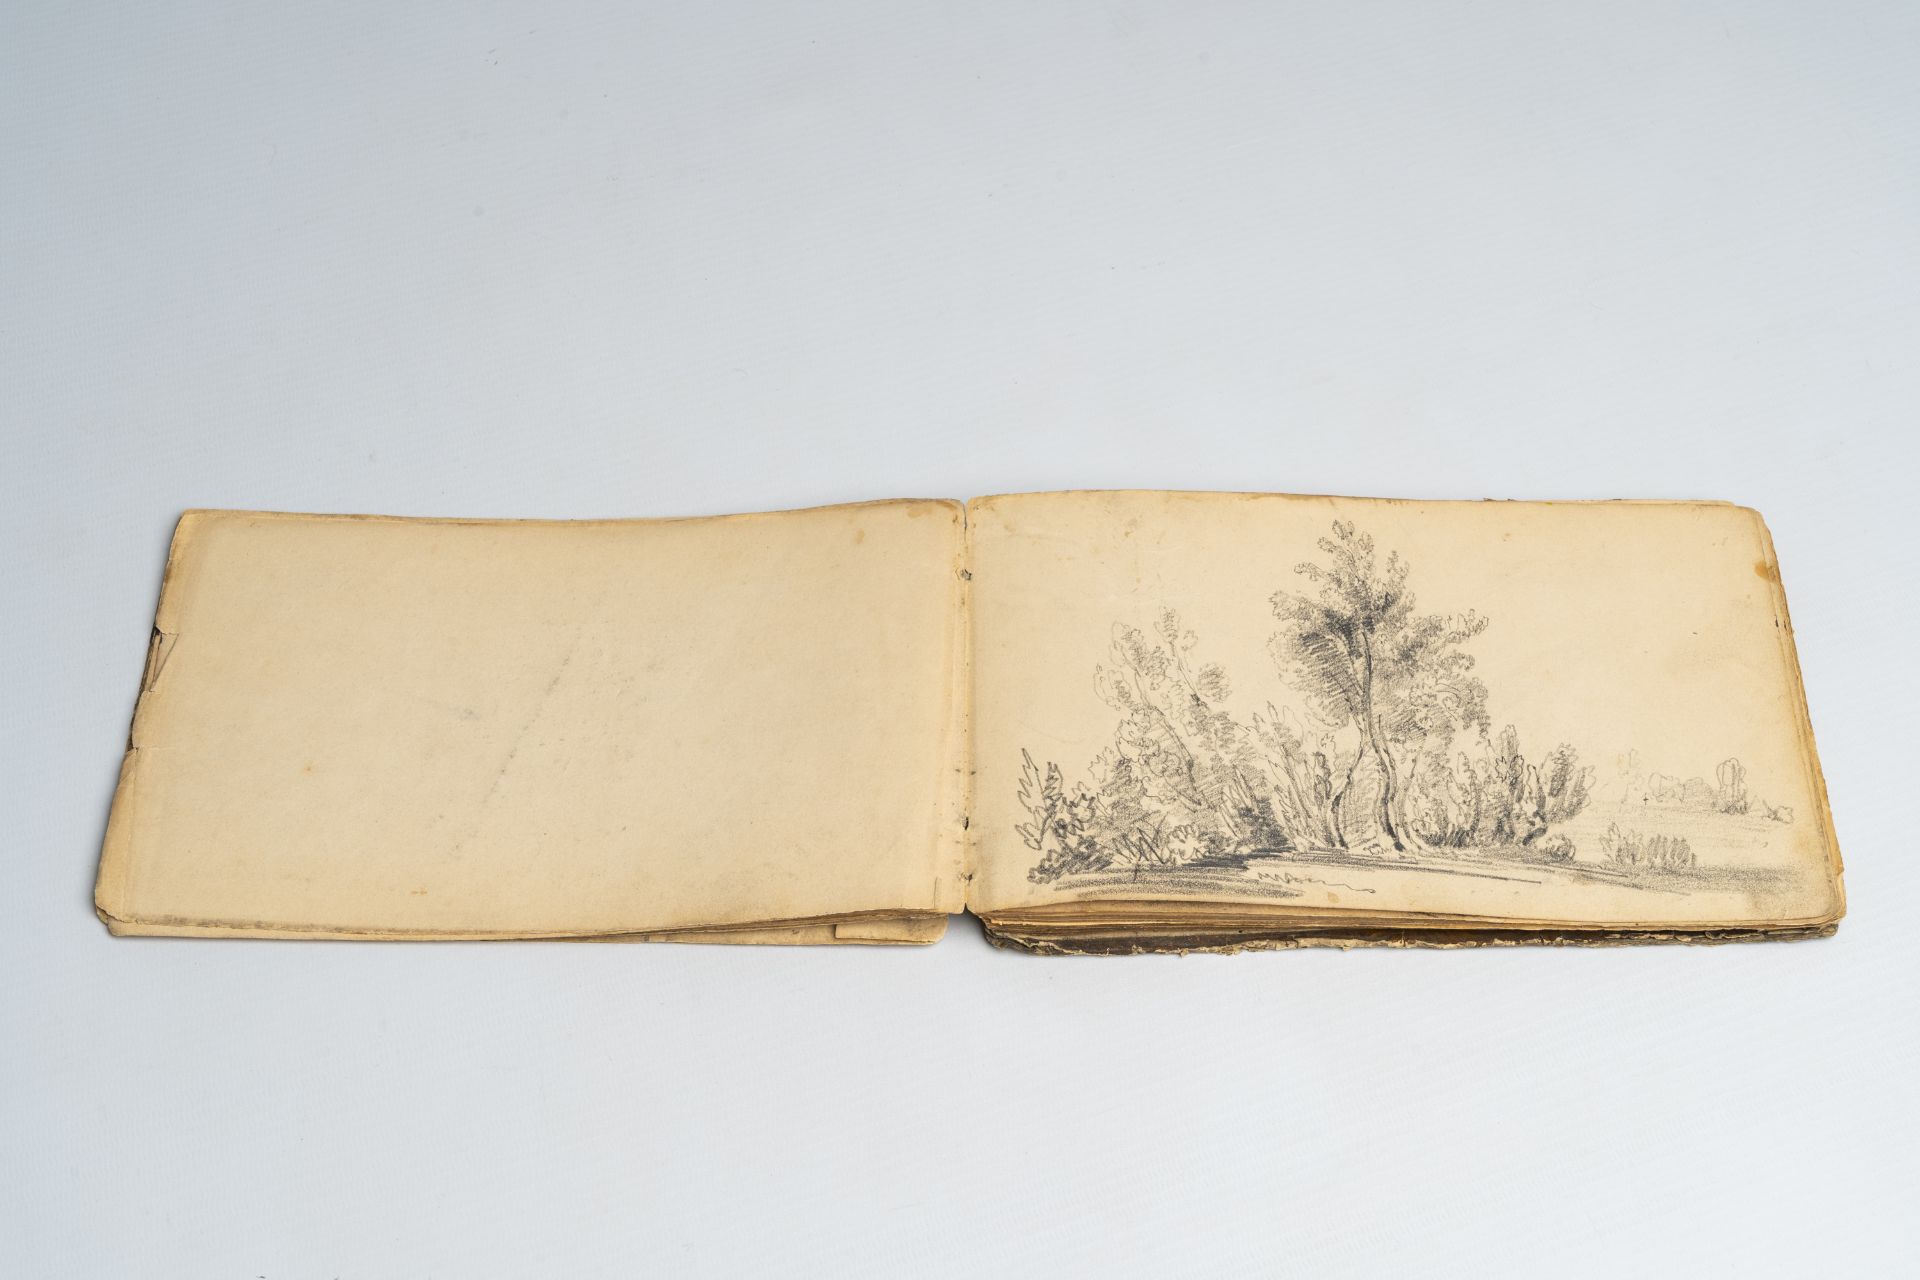 Ildephonse Stocquart (1819-1889): 'Croquis de paysage', sketchbook, pencil and watercolour on paper, - Image 2 of 7